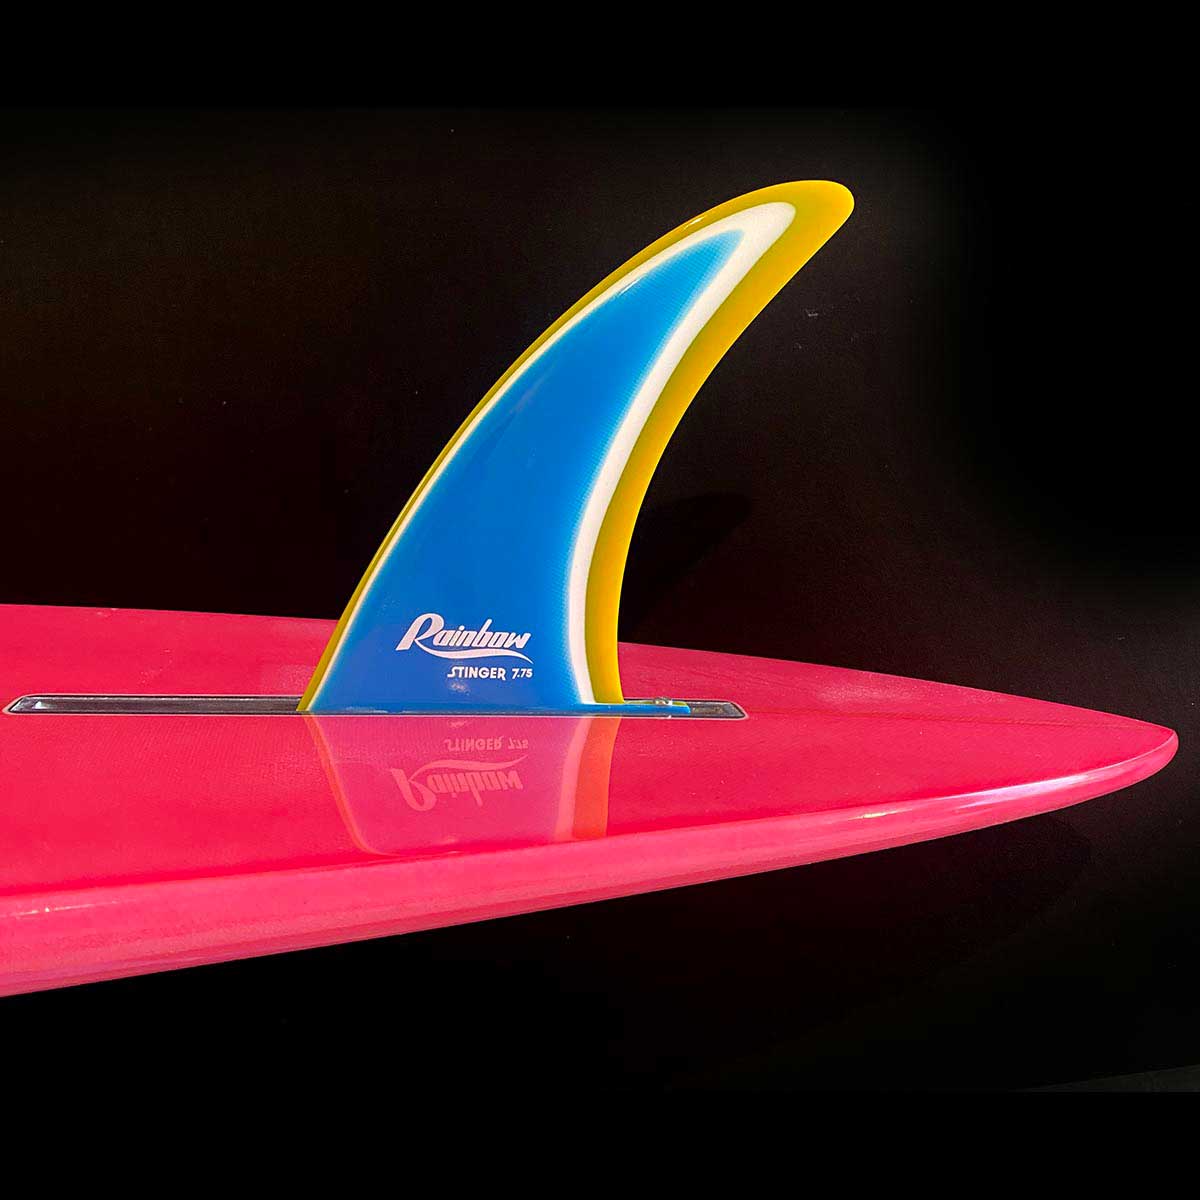 Ocean Ohana Fine Art Surfboard - Hand Shaped by Gerry Lopez & Hand Painted by Drew Brophy